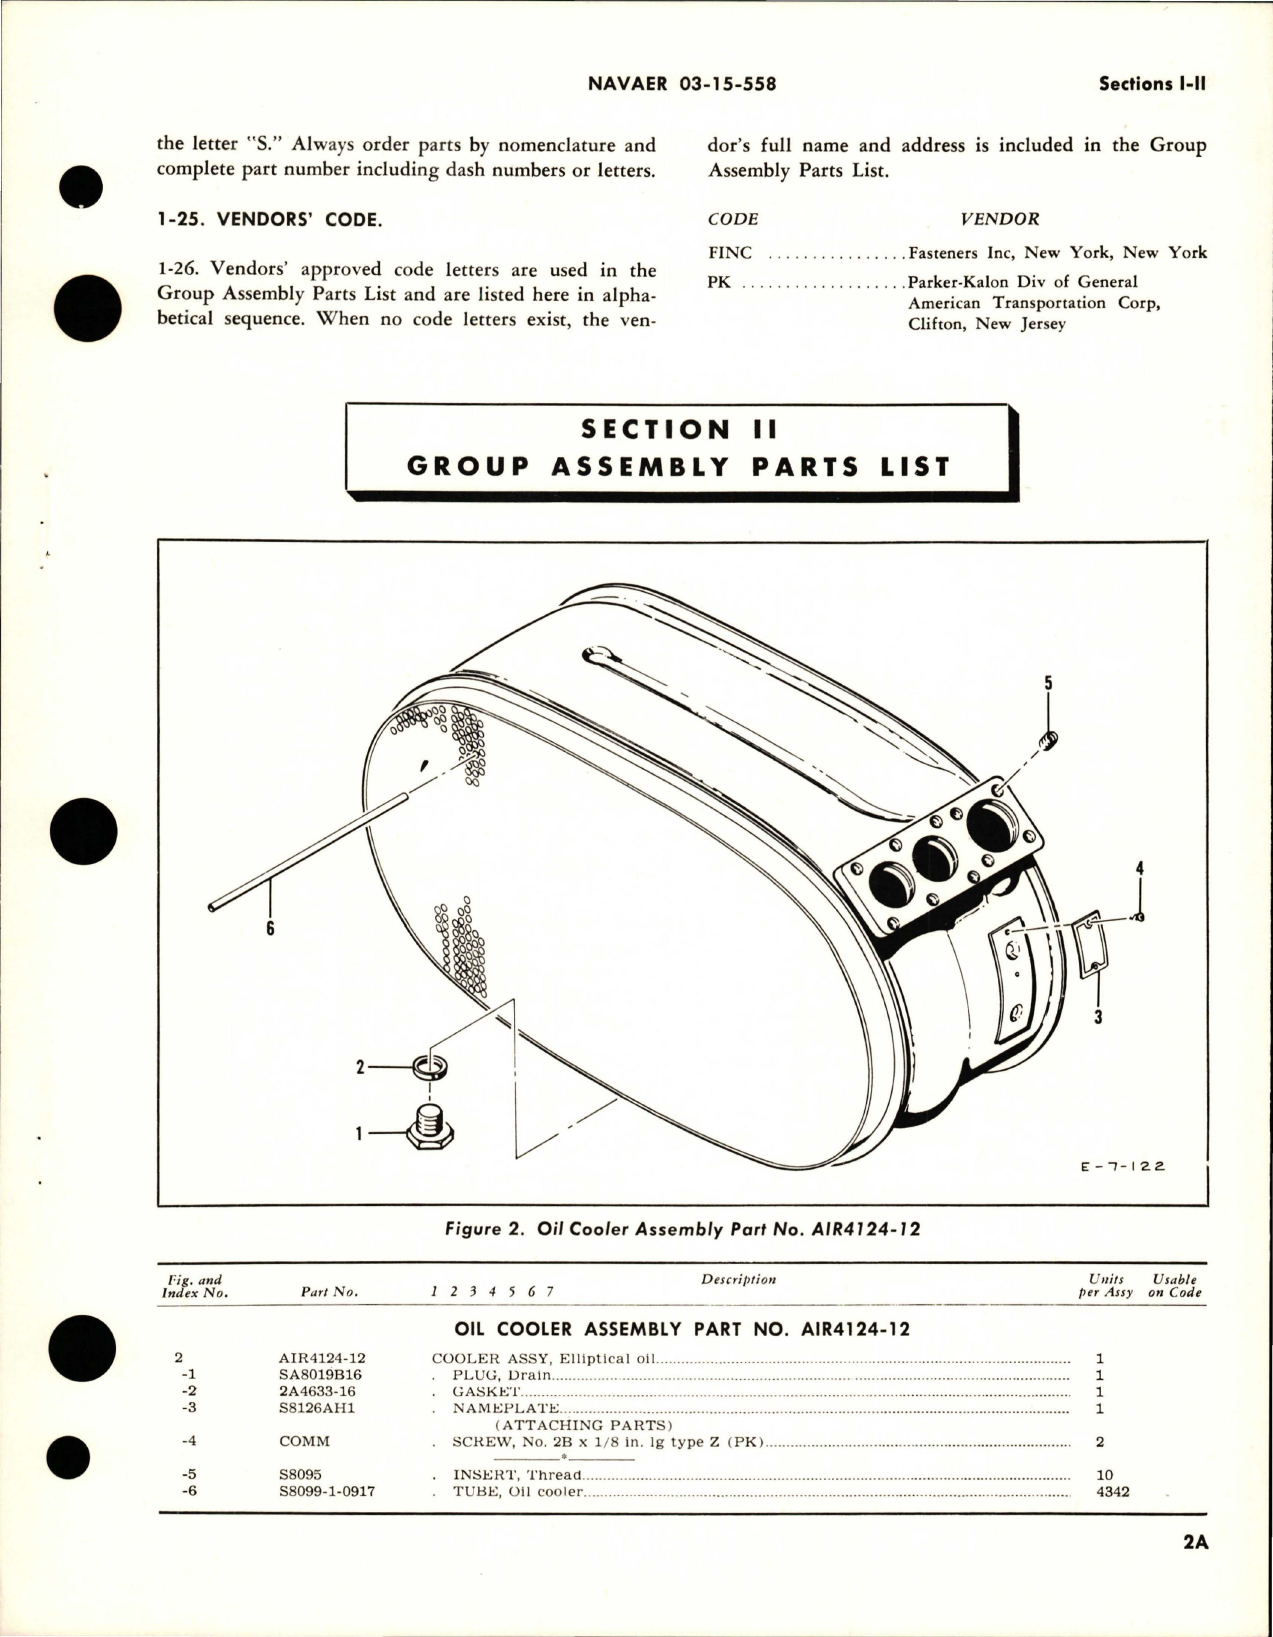 Sample page 5 from AirCorps Library document: Illustrated Parts Breakdown for Oil Coolers